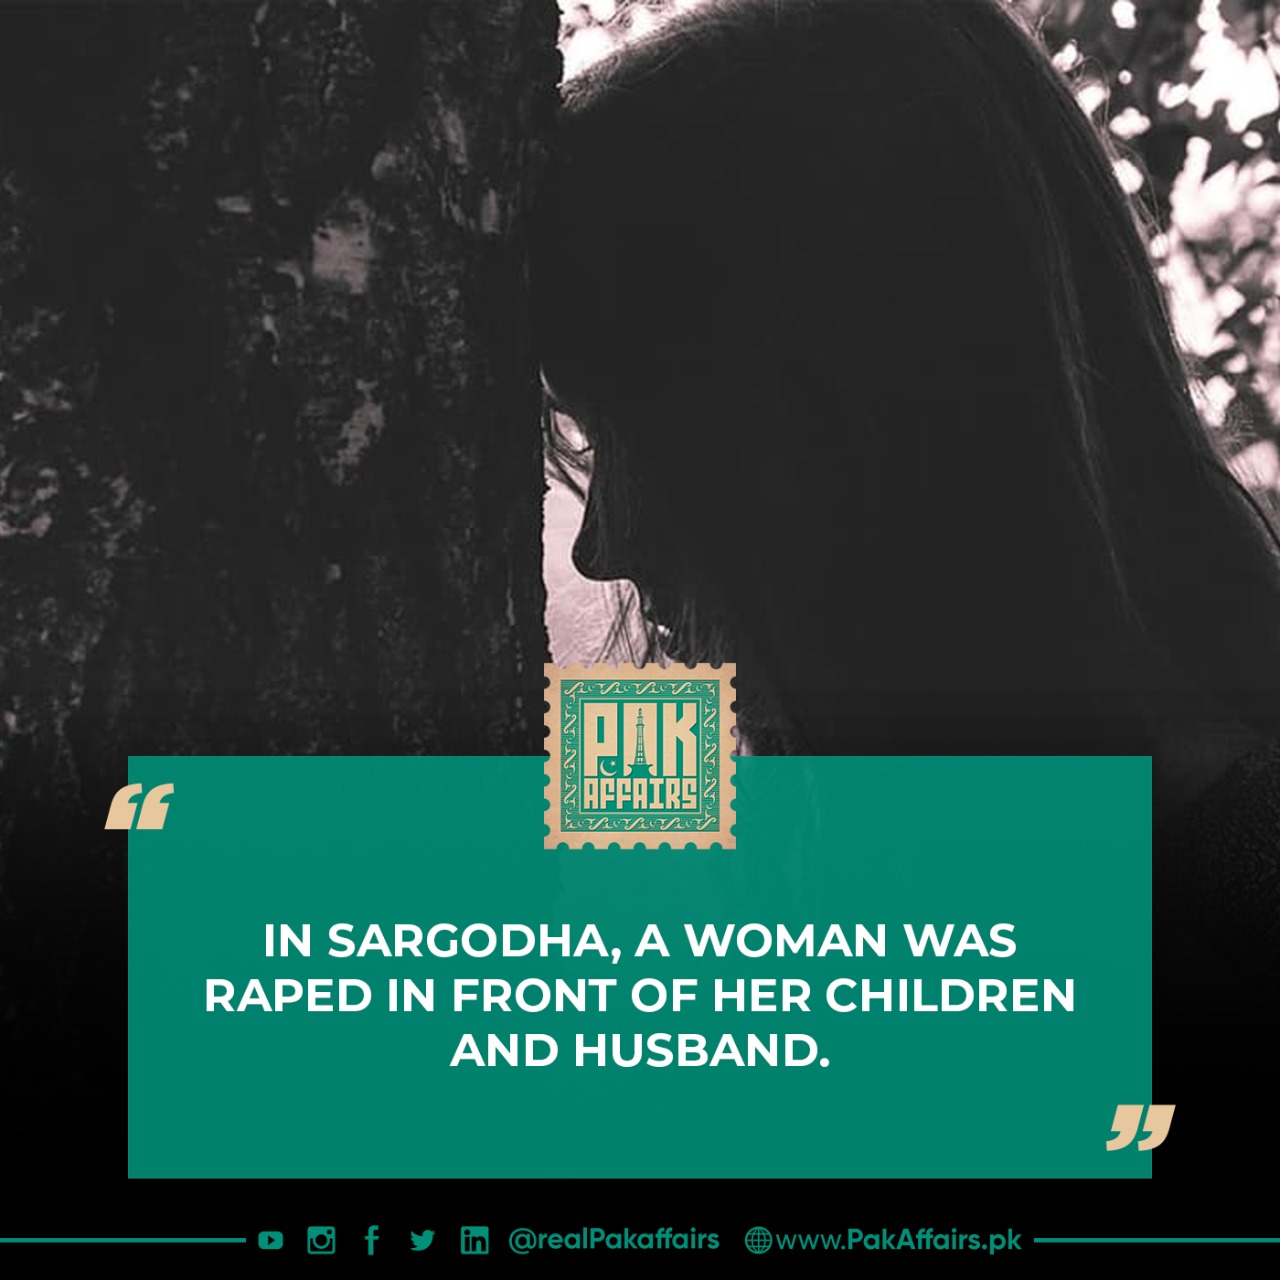 In Sargodha, a woman was raped in front of her children and husband